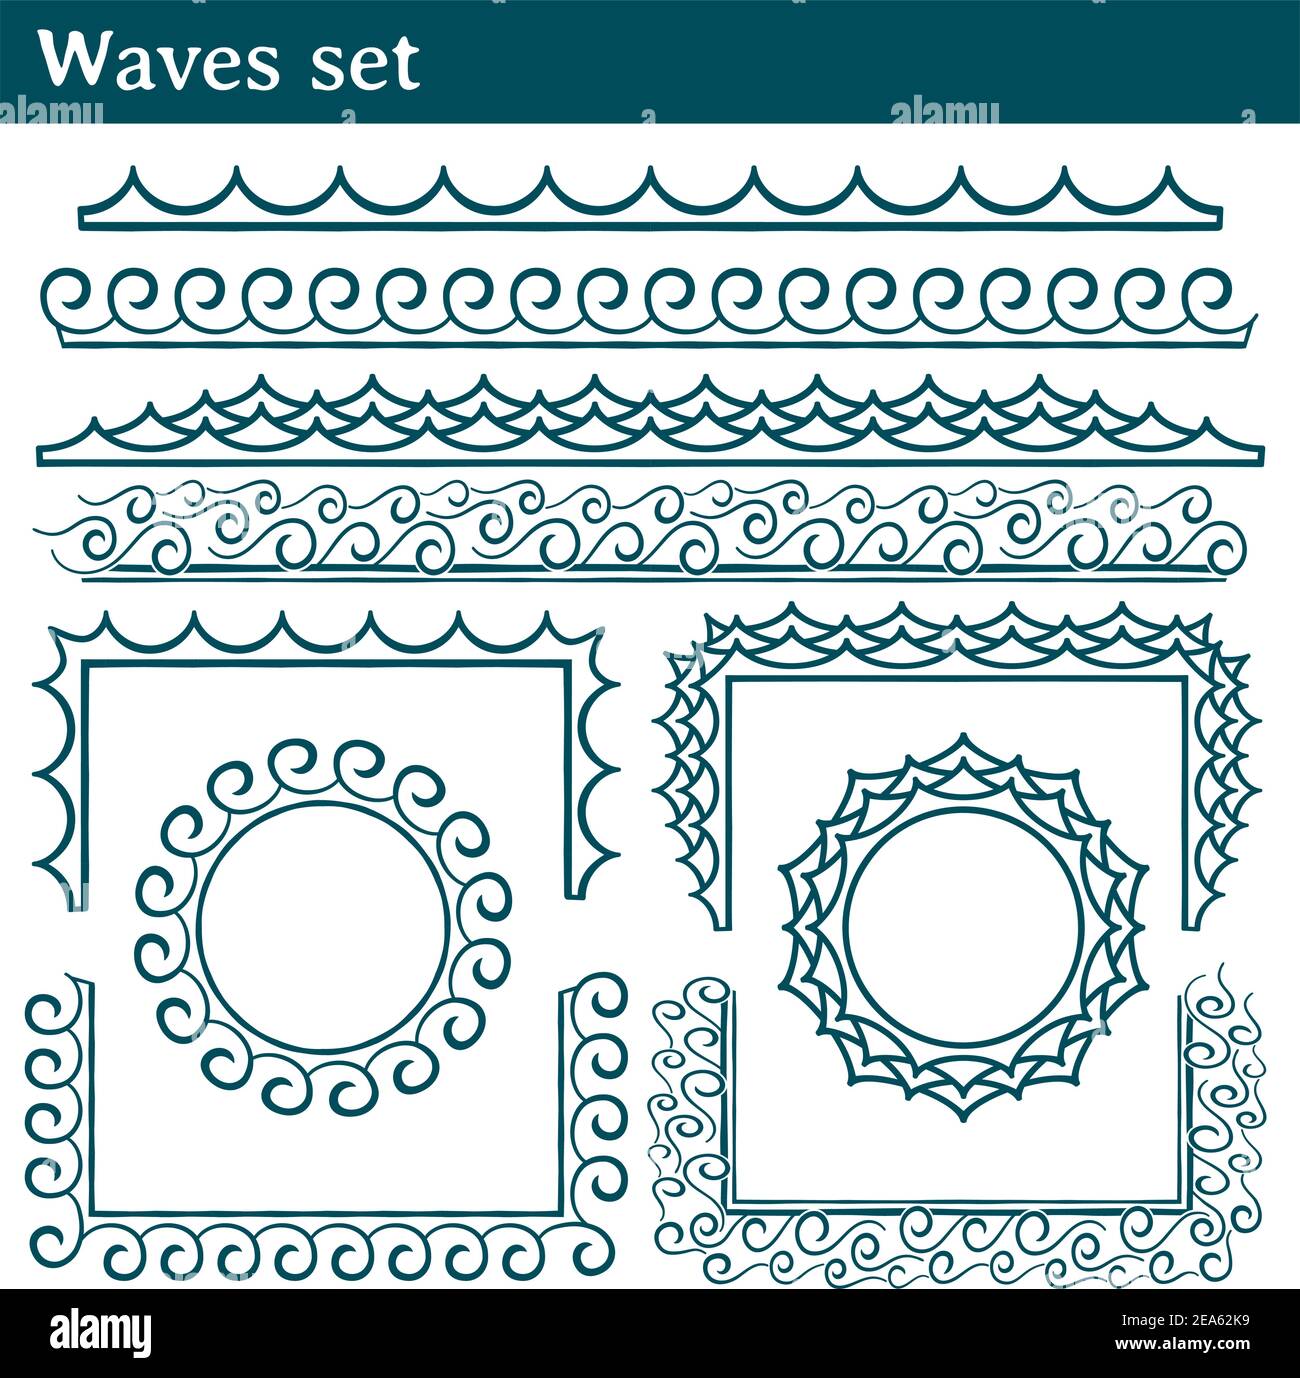 4 different vector brushes with waves. All brushes include outer and inner corner tiles. Stock Vector